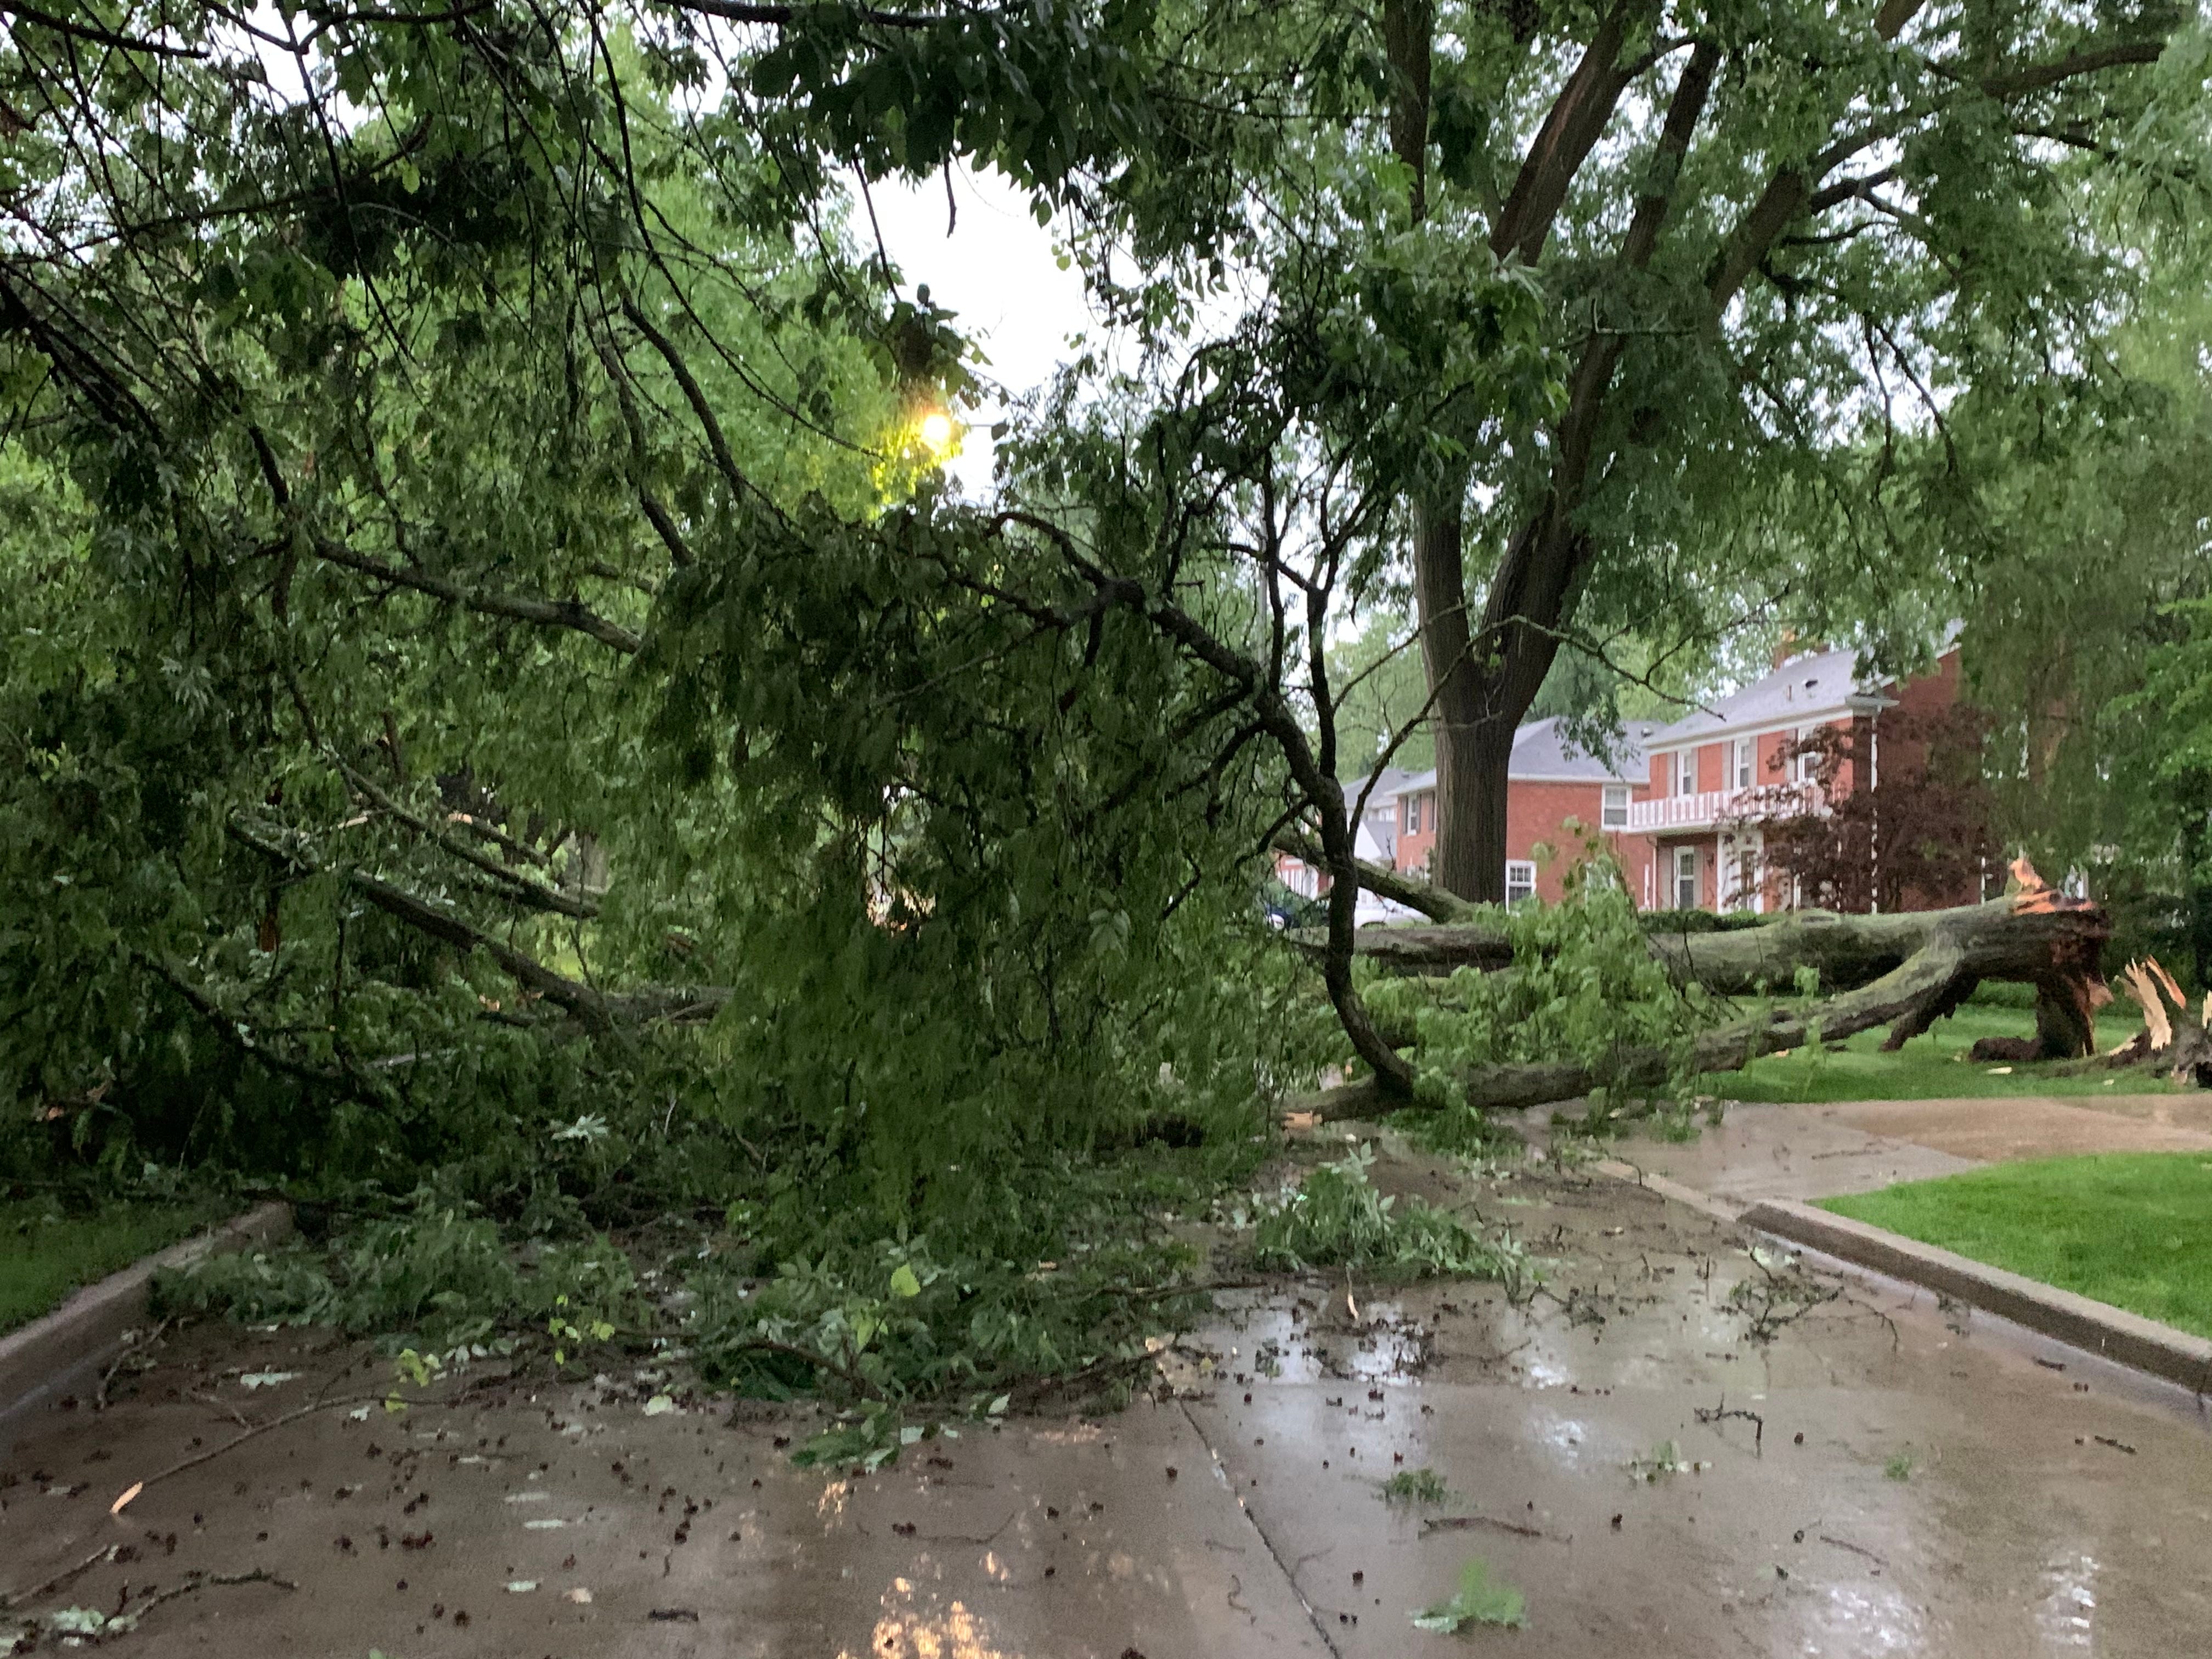 Massive trees are uprooted along N. Oxford Street in Grosse Pointe Woods on Wednesday, June 10, 2020.